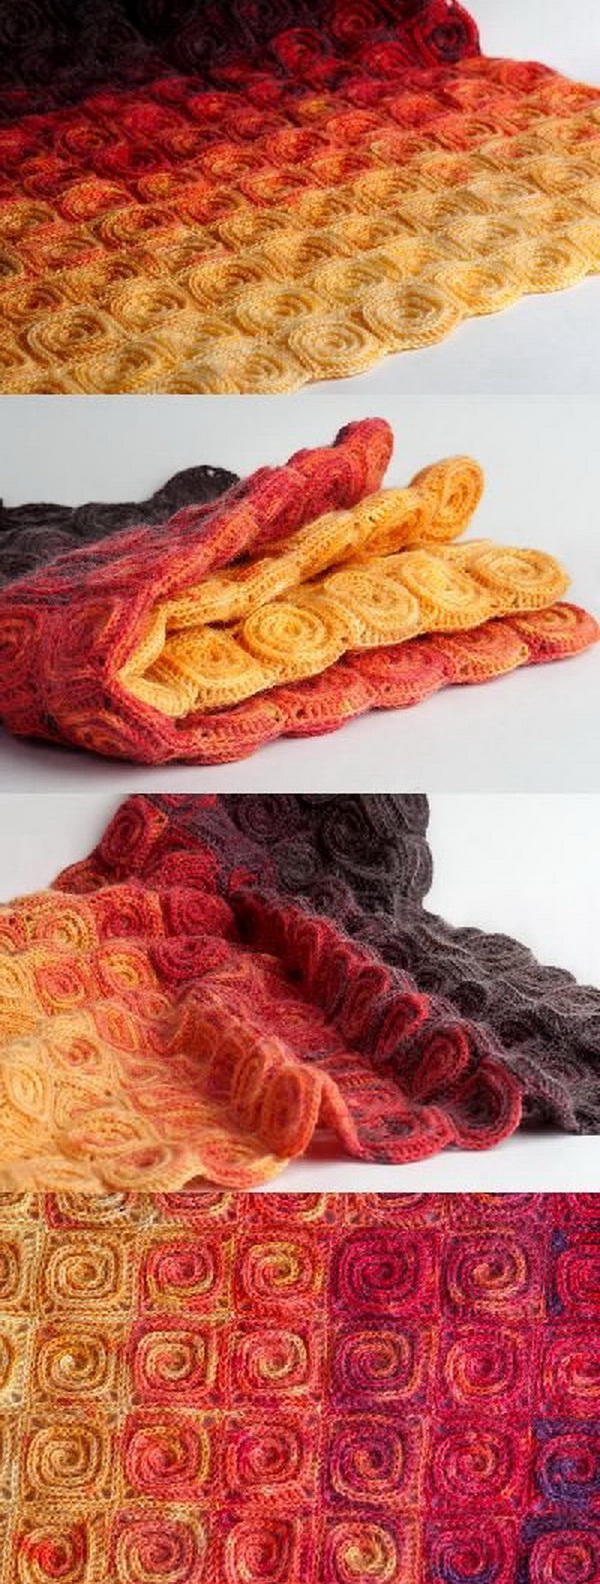 Quick And Easy Crochet Blanket Patterns For Beginners: Fire blanket. 